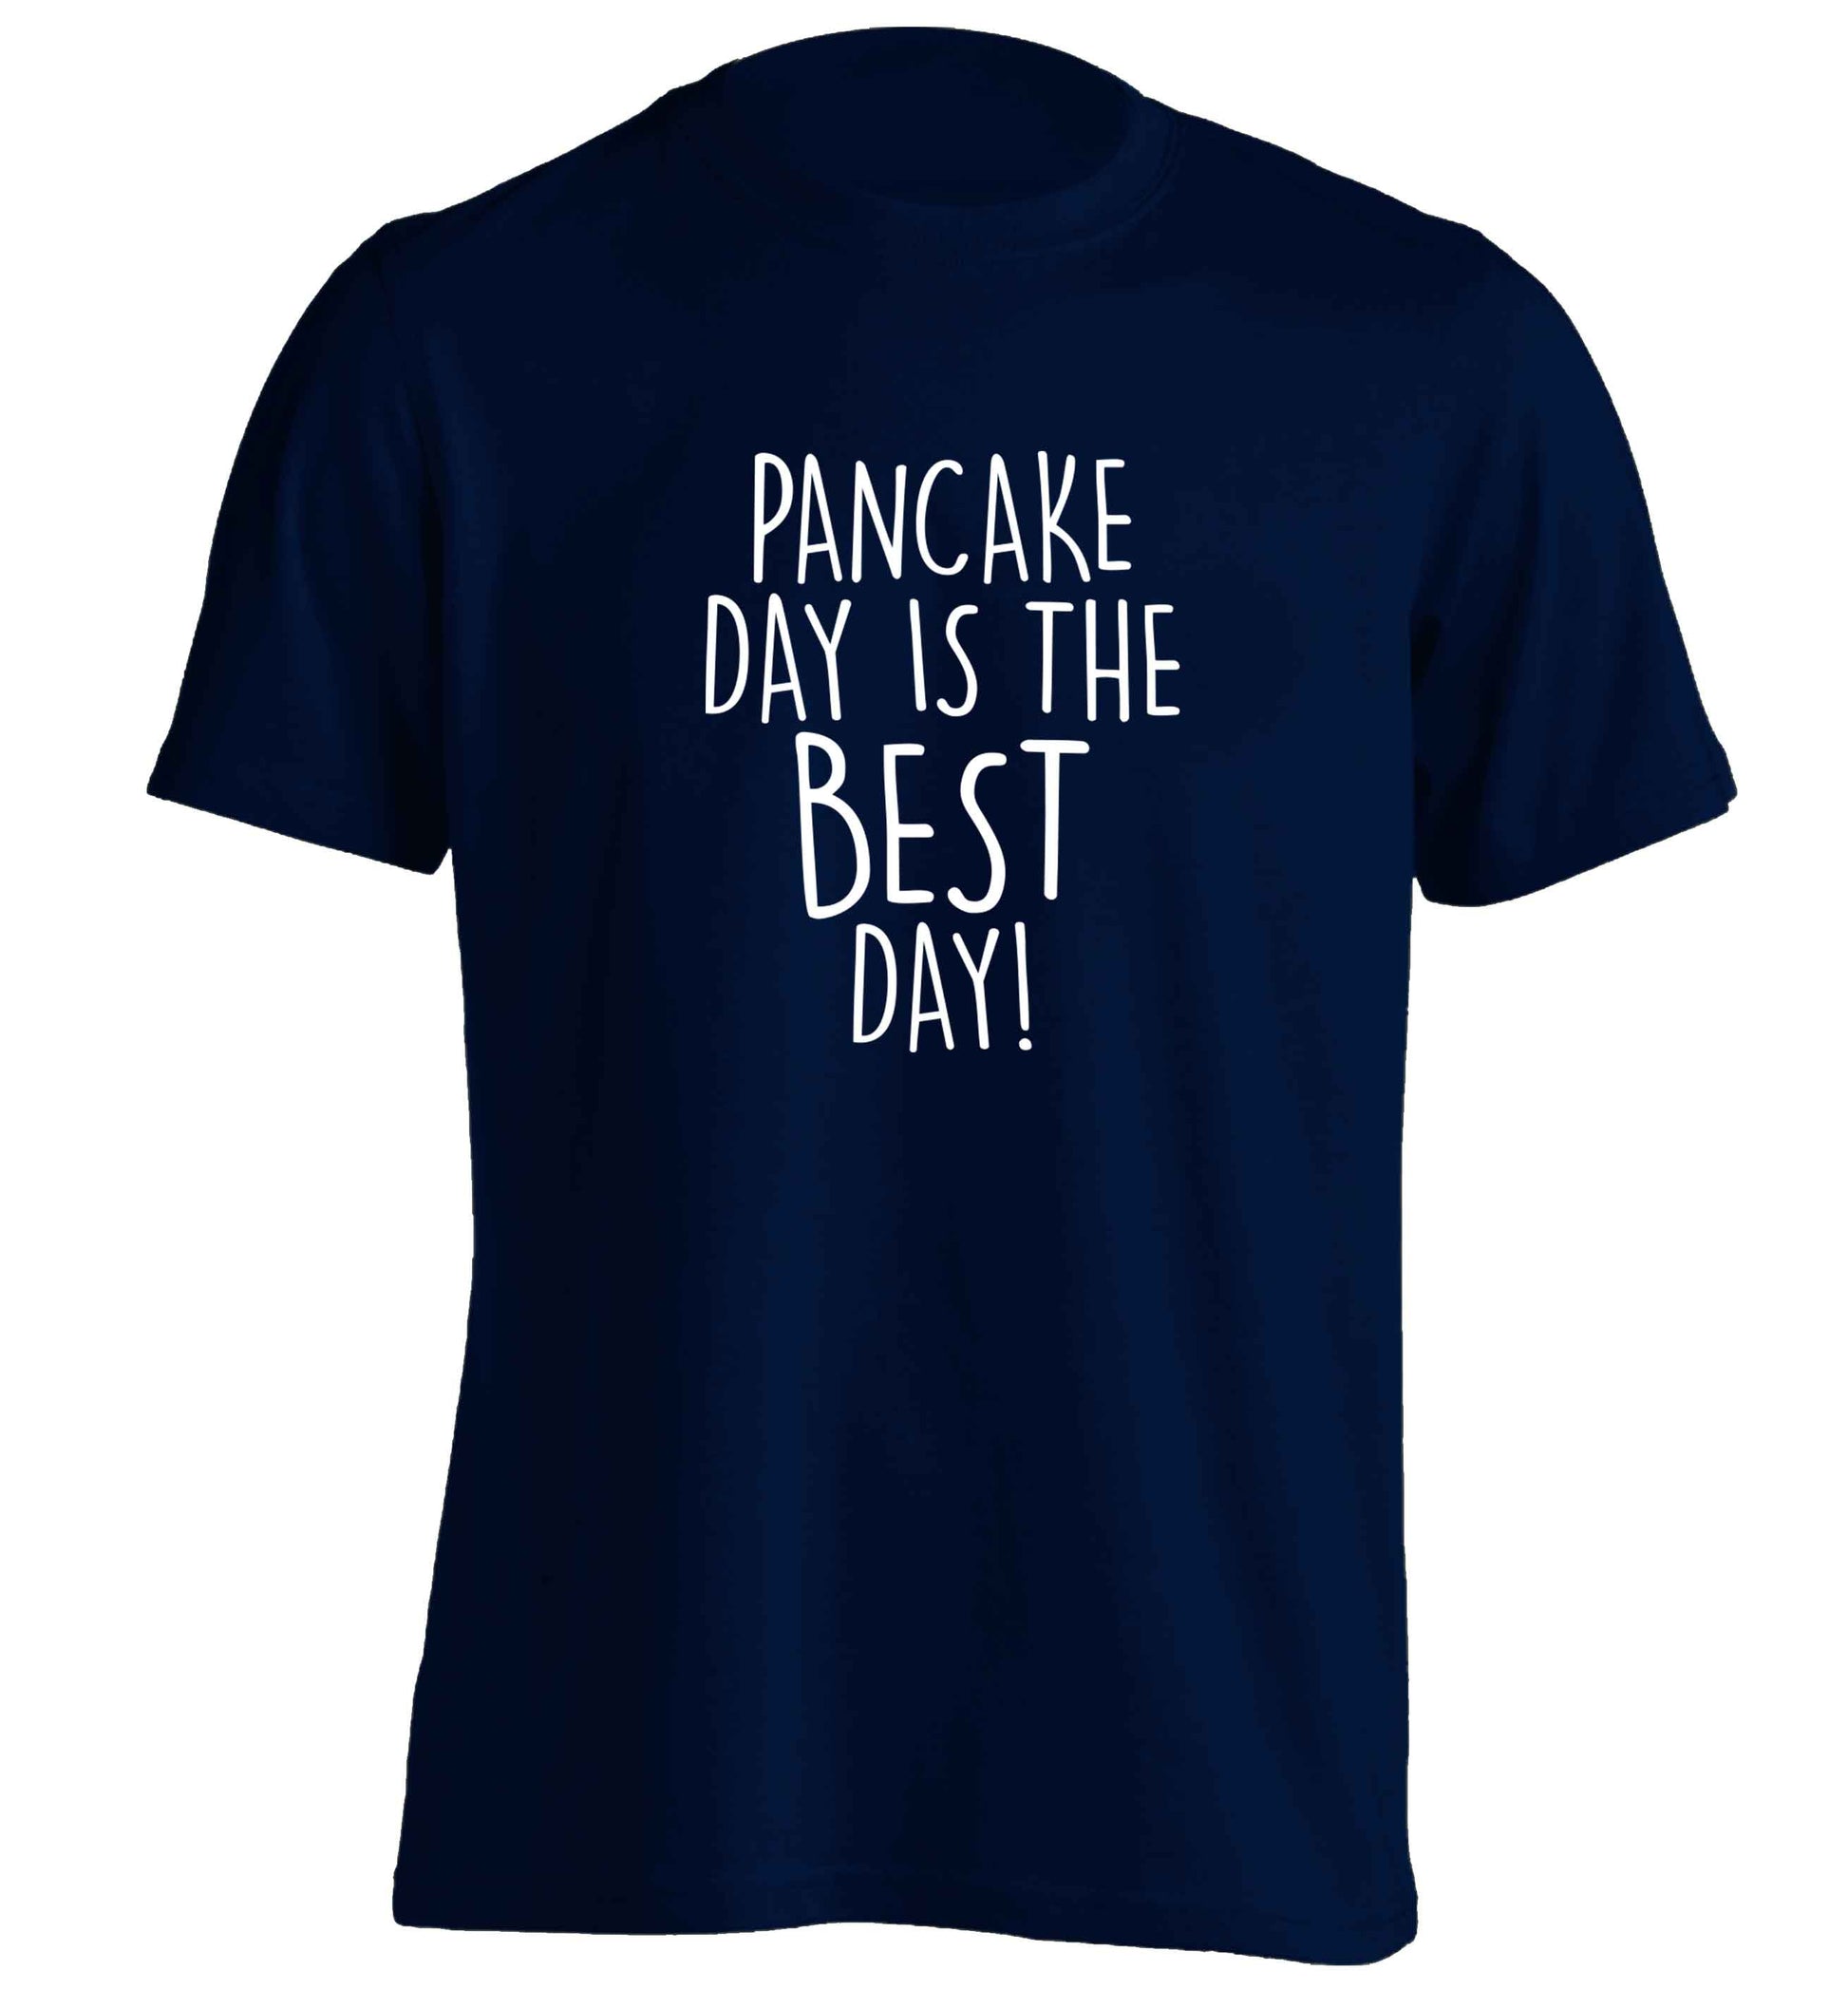 Pancake day is the best day adults unisex navy Tshirt 2XL